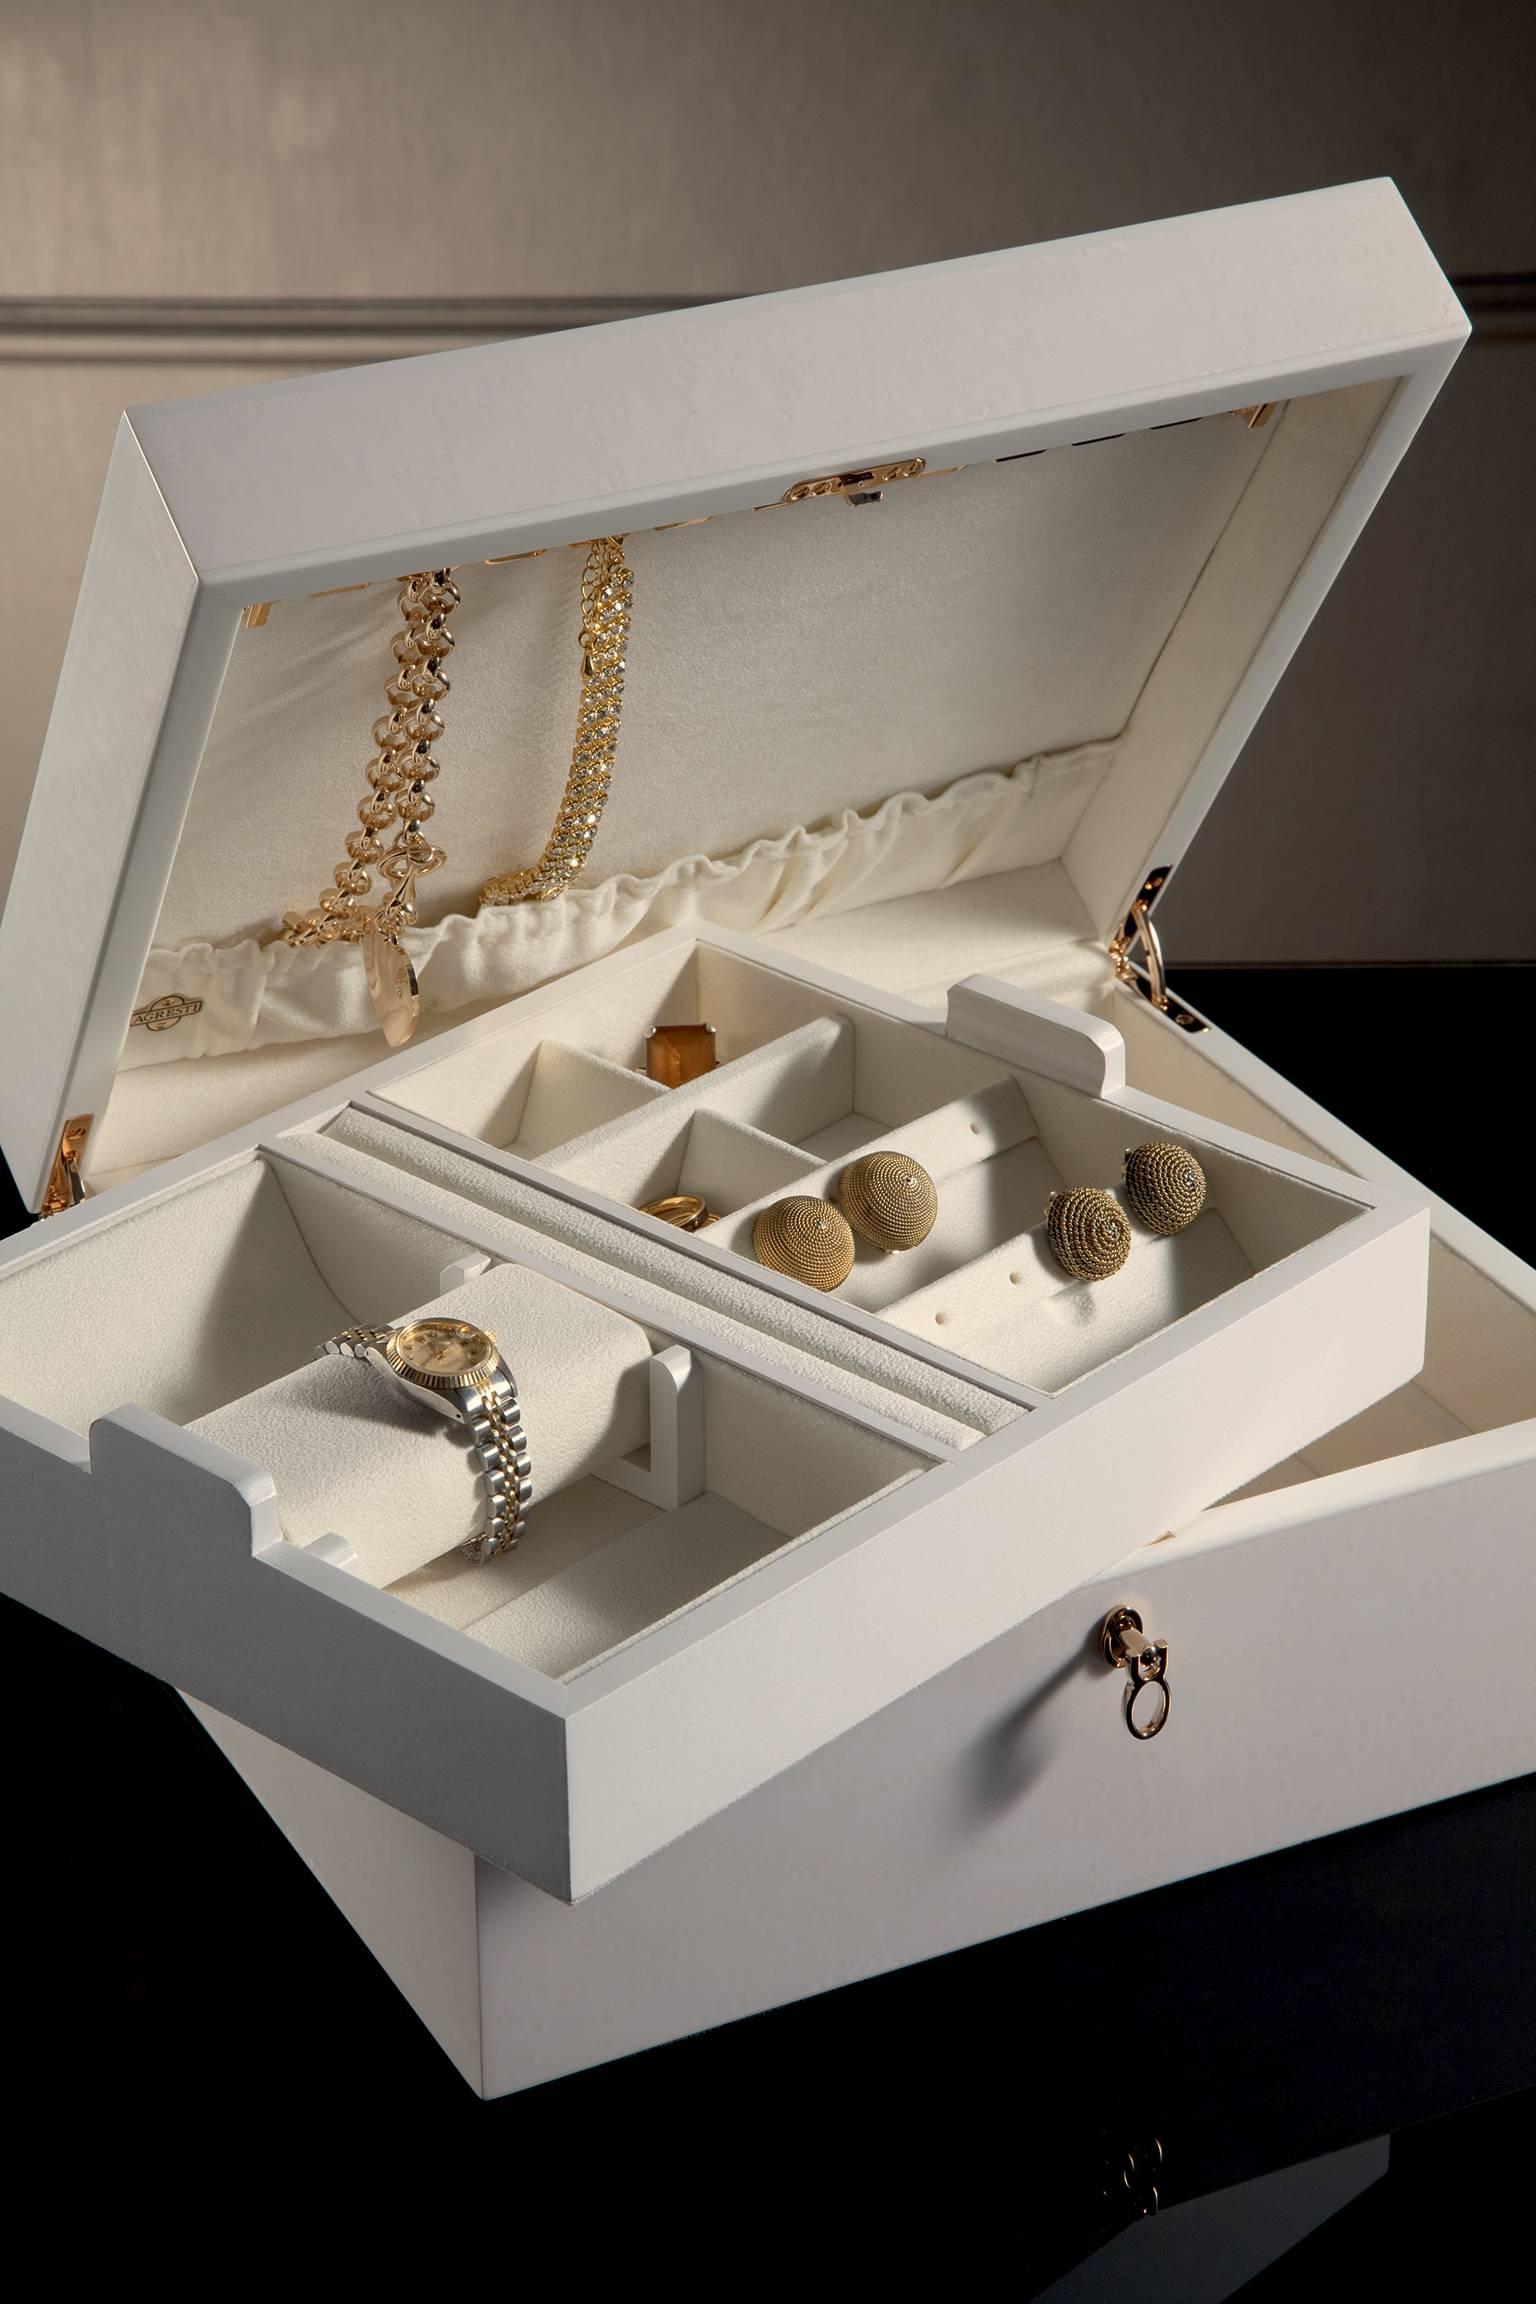 Shiny white bird's-eye maple shiny jewel box with 24-karat pink gold hardware. Necklace on the top and removable tray.